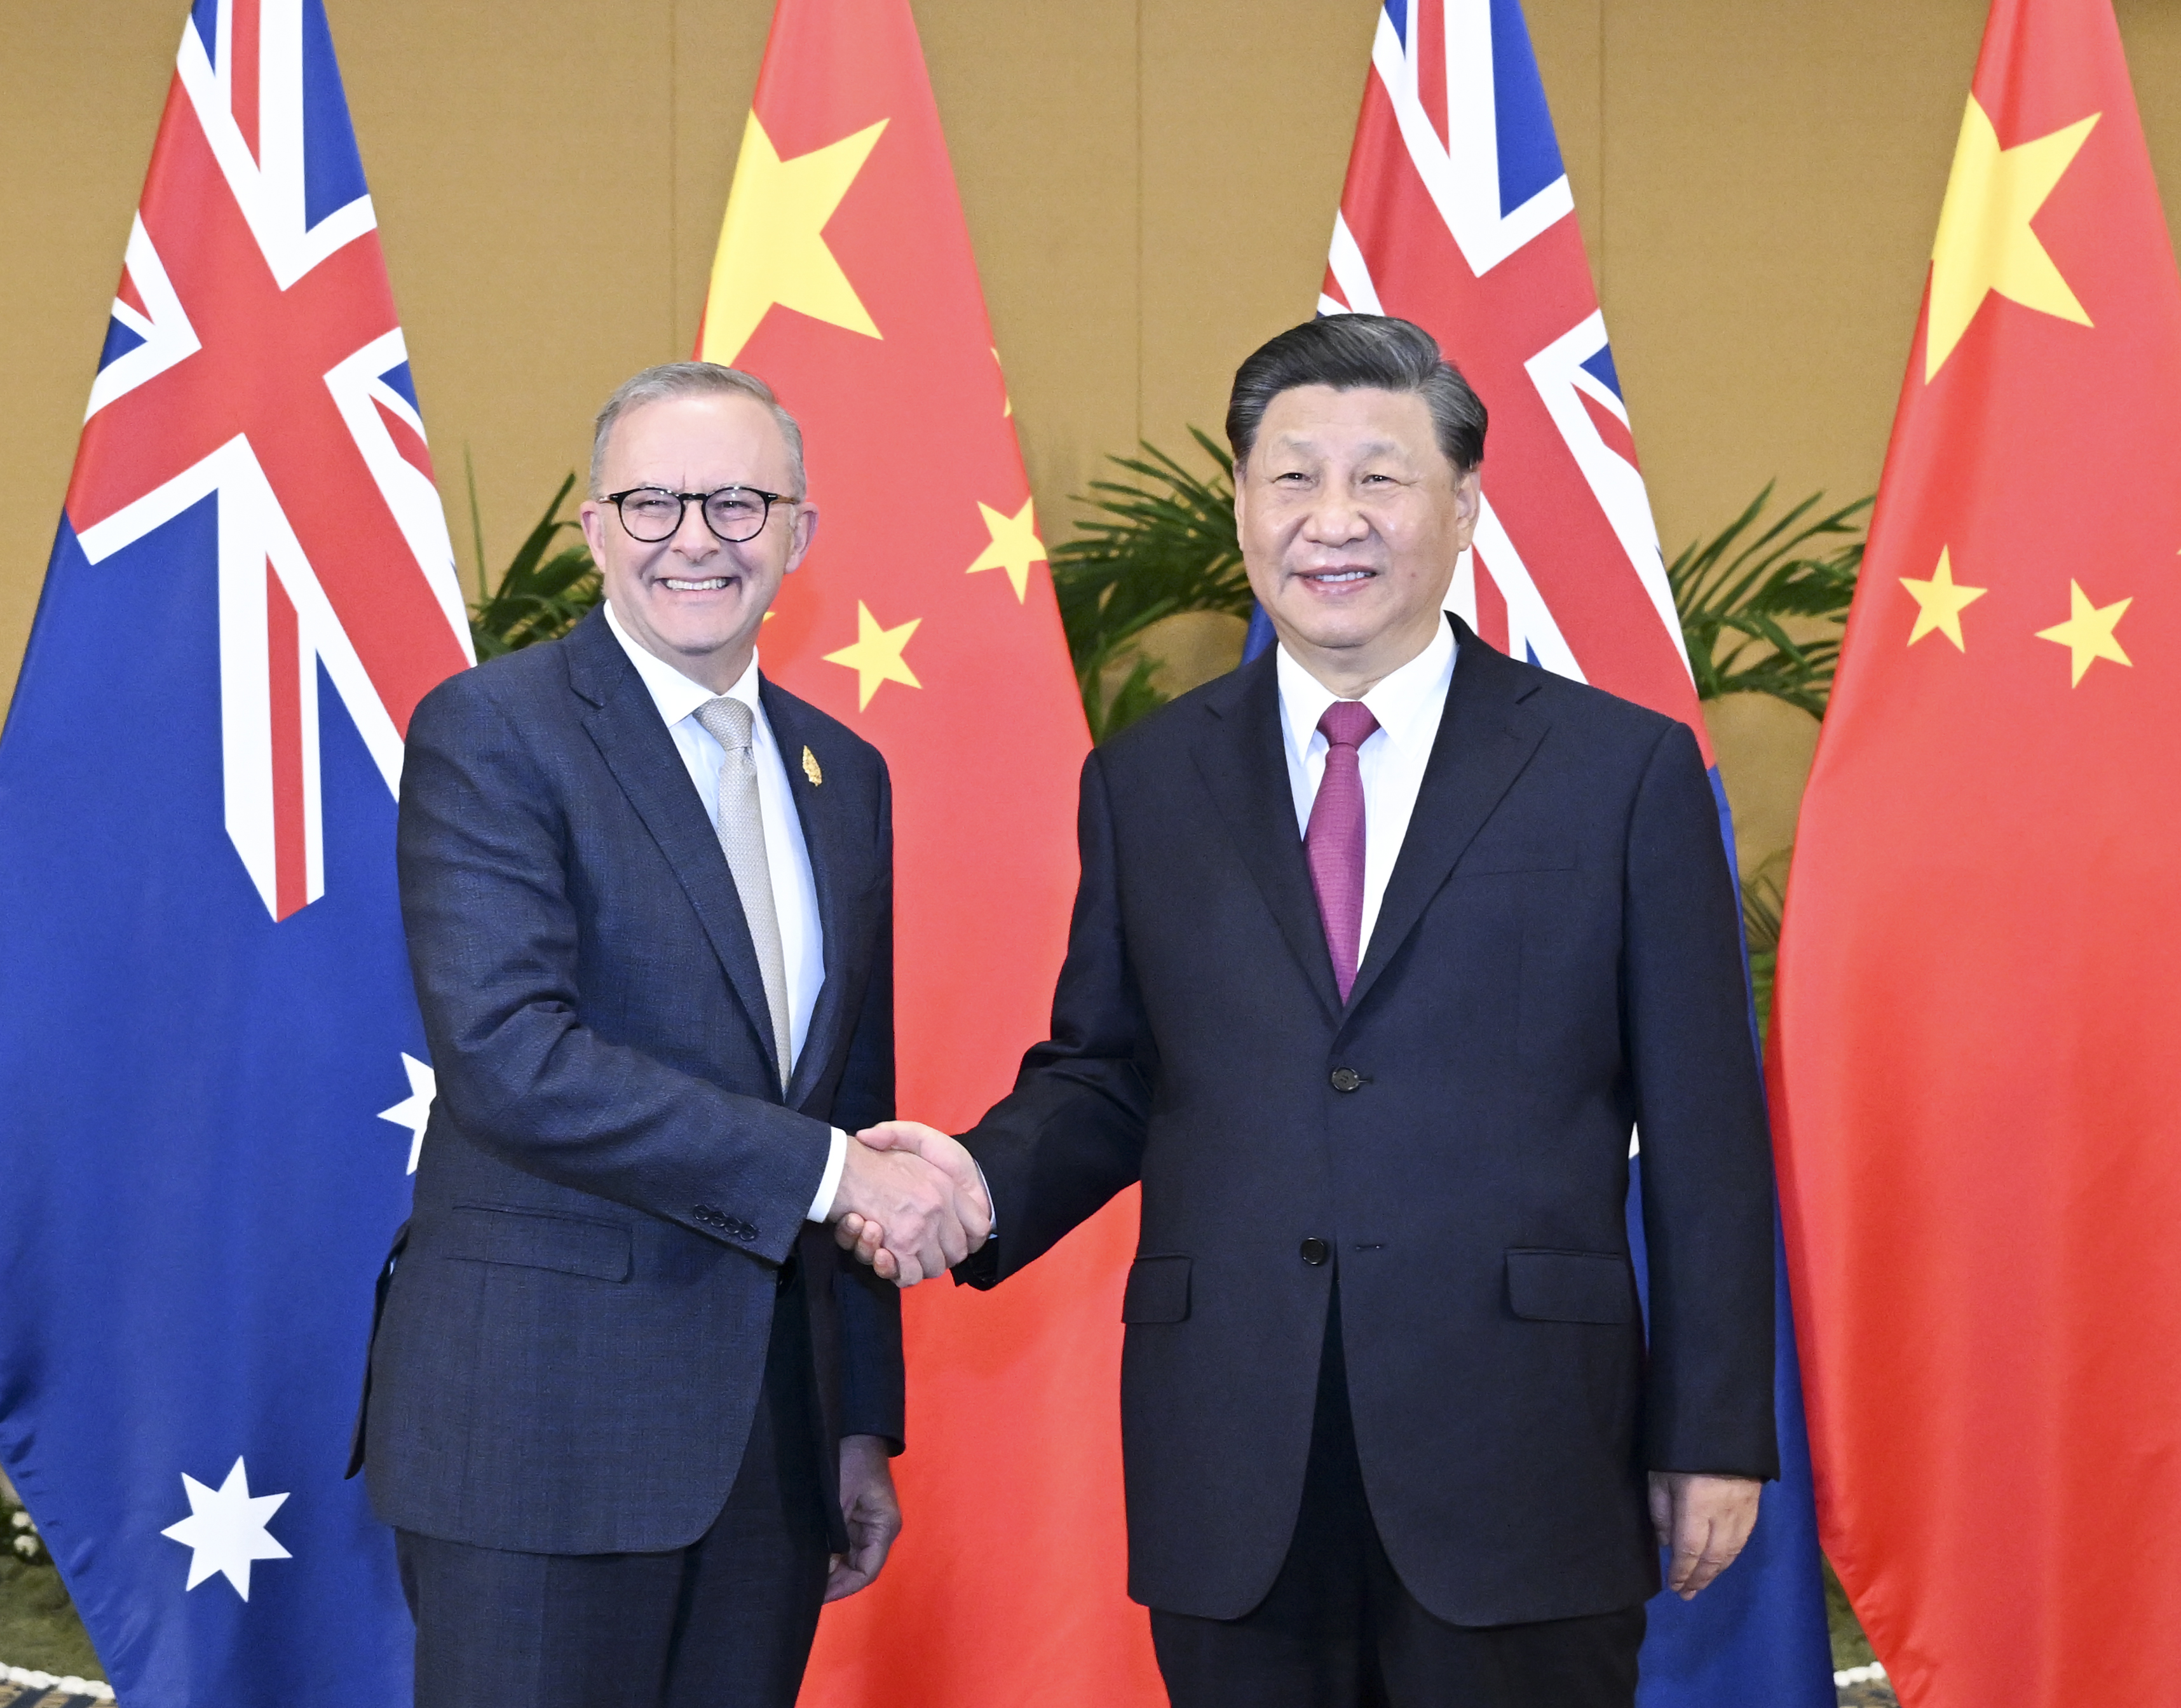 Hua Chunying 华春莹on Twitter: "President Xi Jinping met with Australian Prime Minister Anthony Albanese. President Xi said that in the past few years, China-Australia relations have encountered difficulties, which is